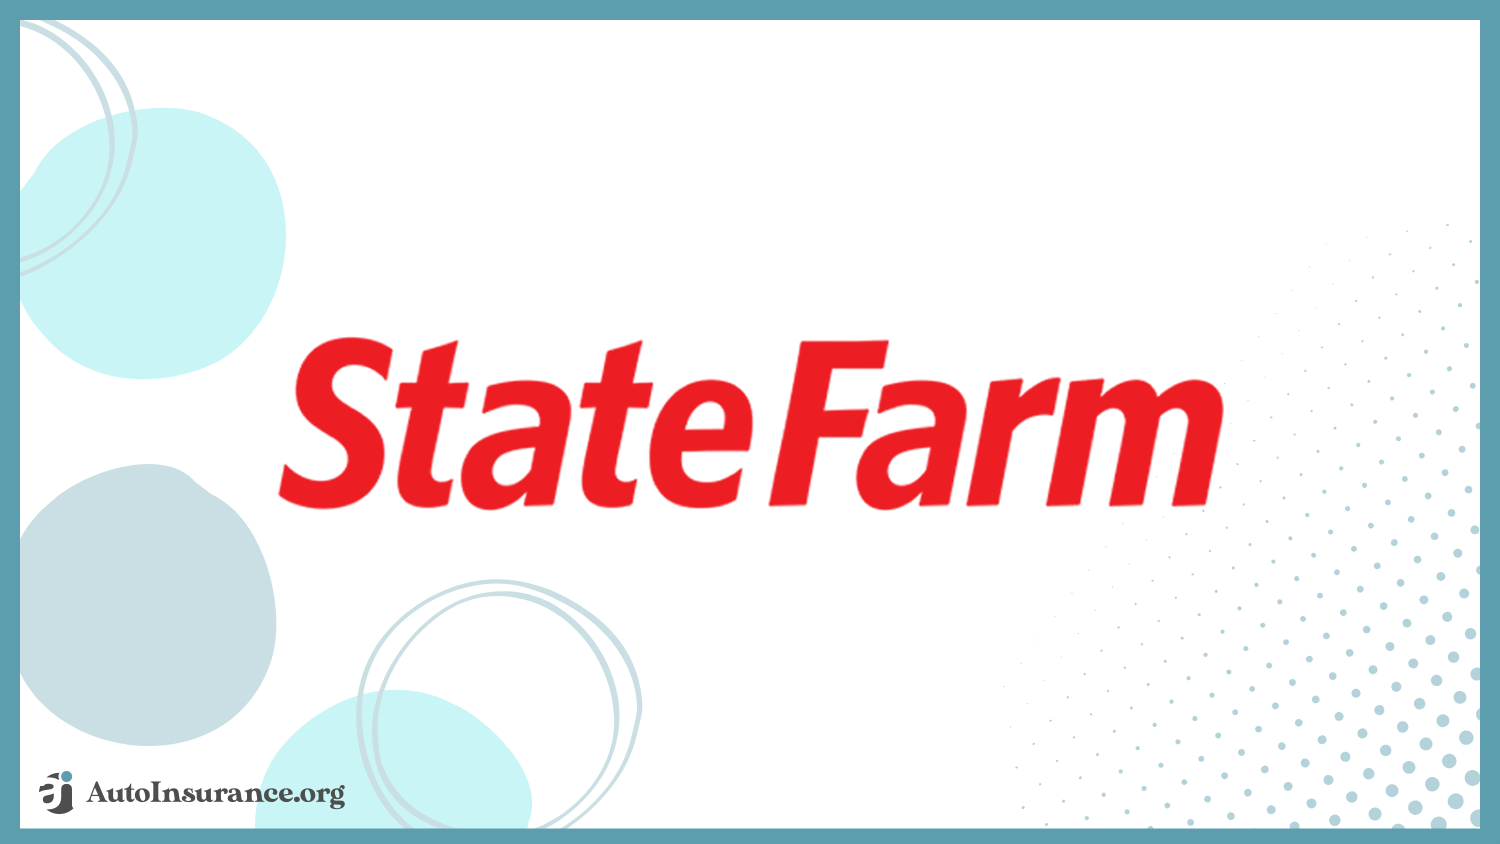 State Farm: Best Auto Insurance for Drivers With Multiple Sclerosis